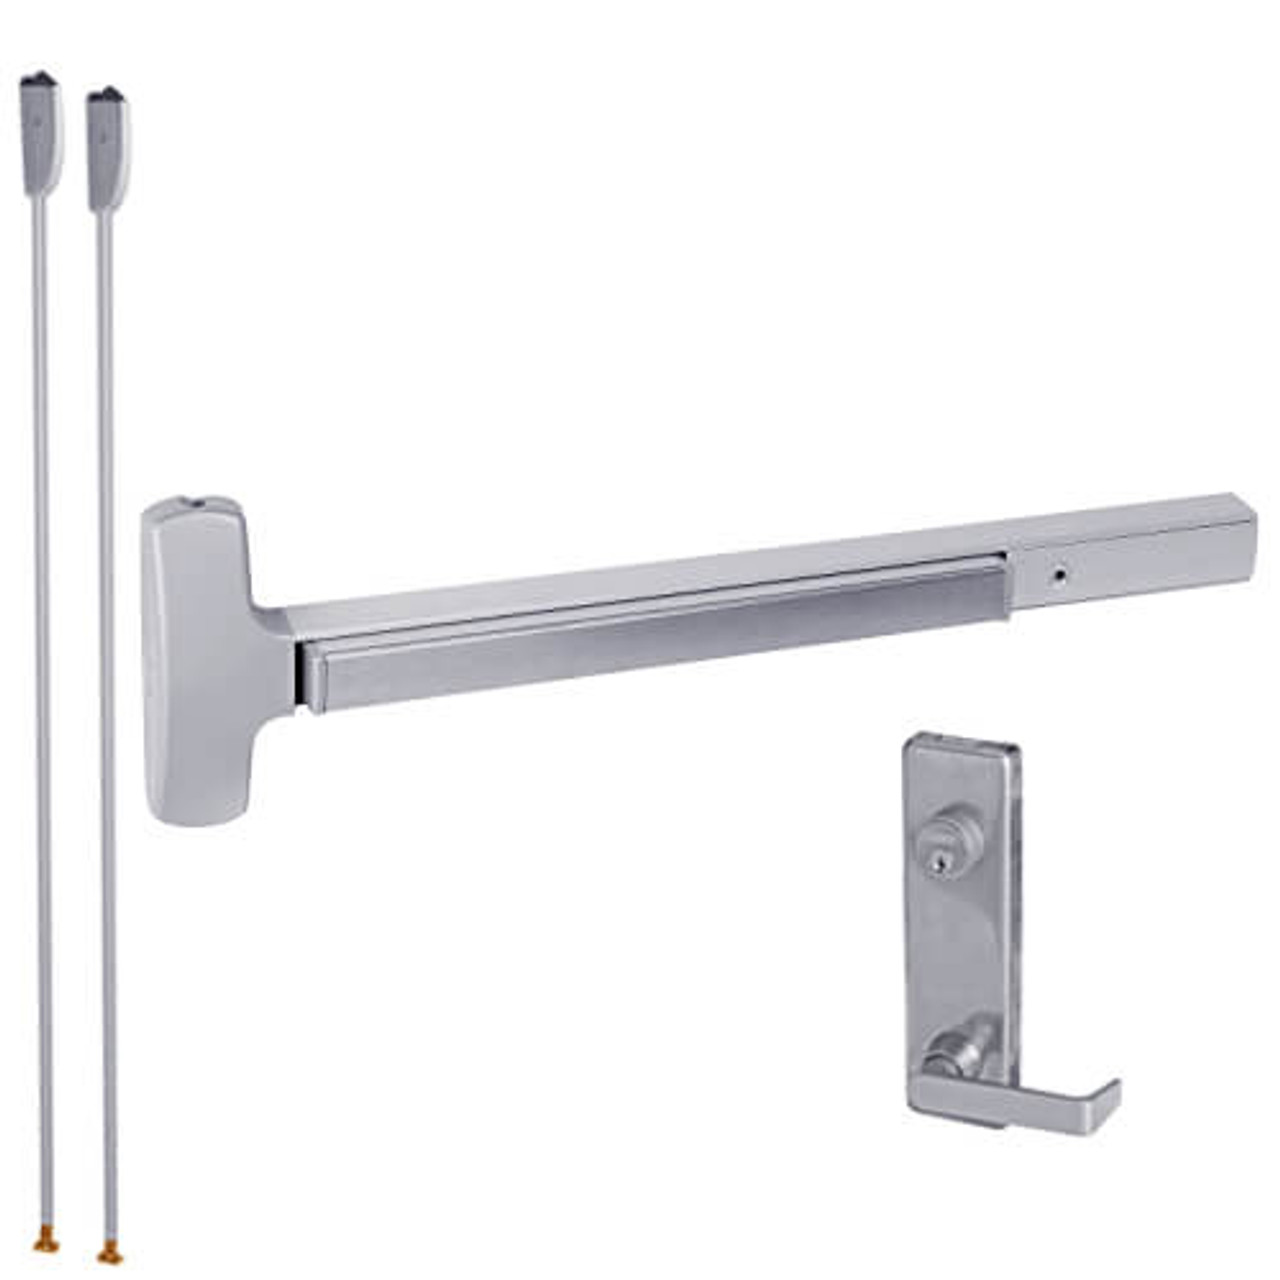 25-V-L-NL-DANE-US32-3-LHR Falcon Exit Device in Polished Stainless Steel